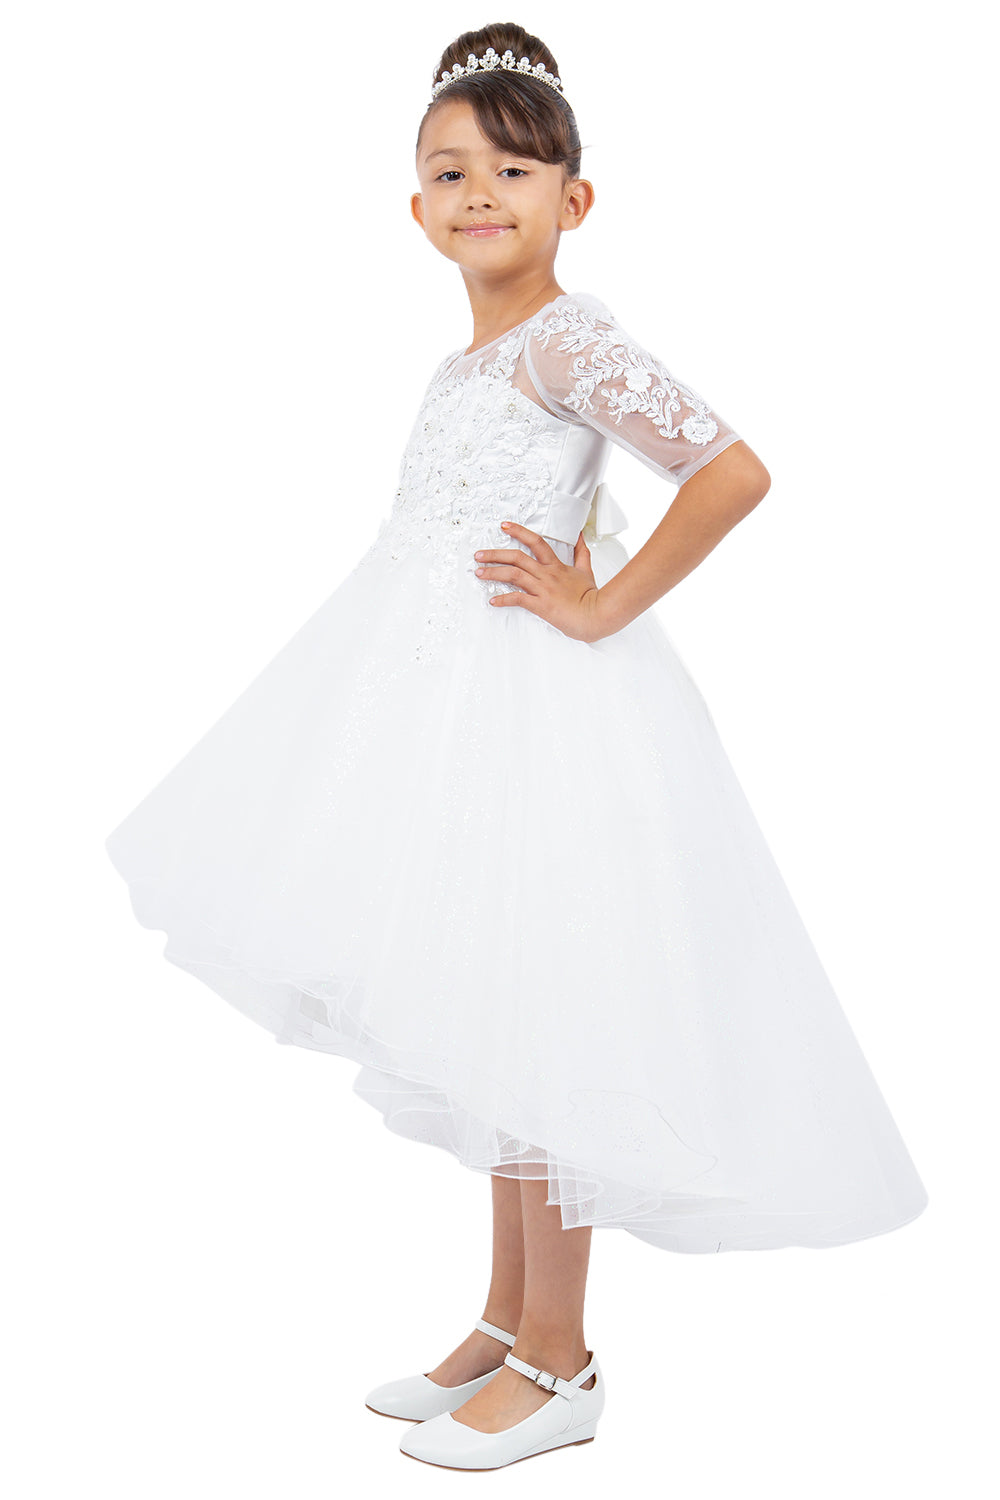 3/4 Sleeve Illusion High Low Flower Girl Dress by Cinderella Couture USA AS5128